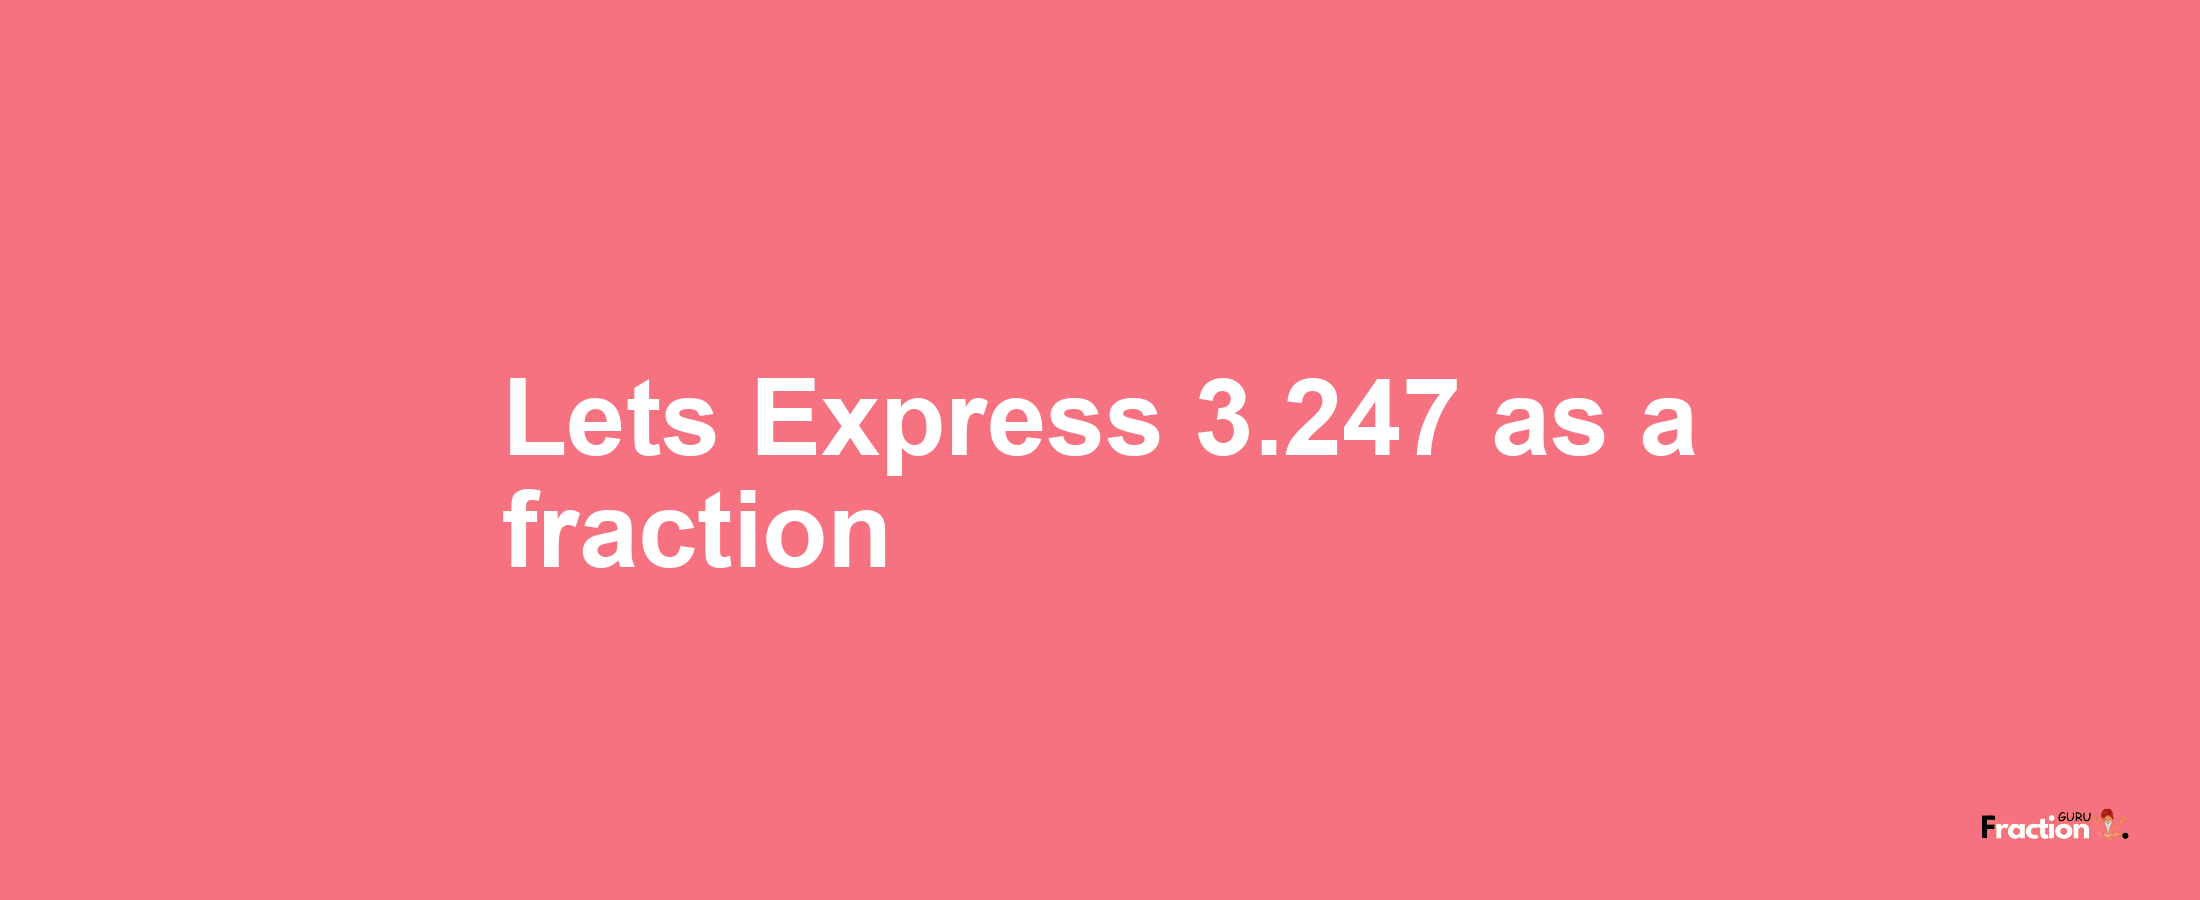 Lets Express 3.247 as afraction